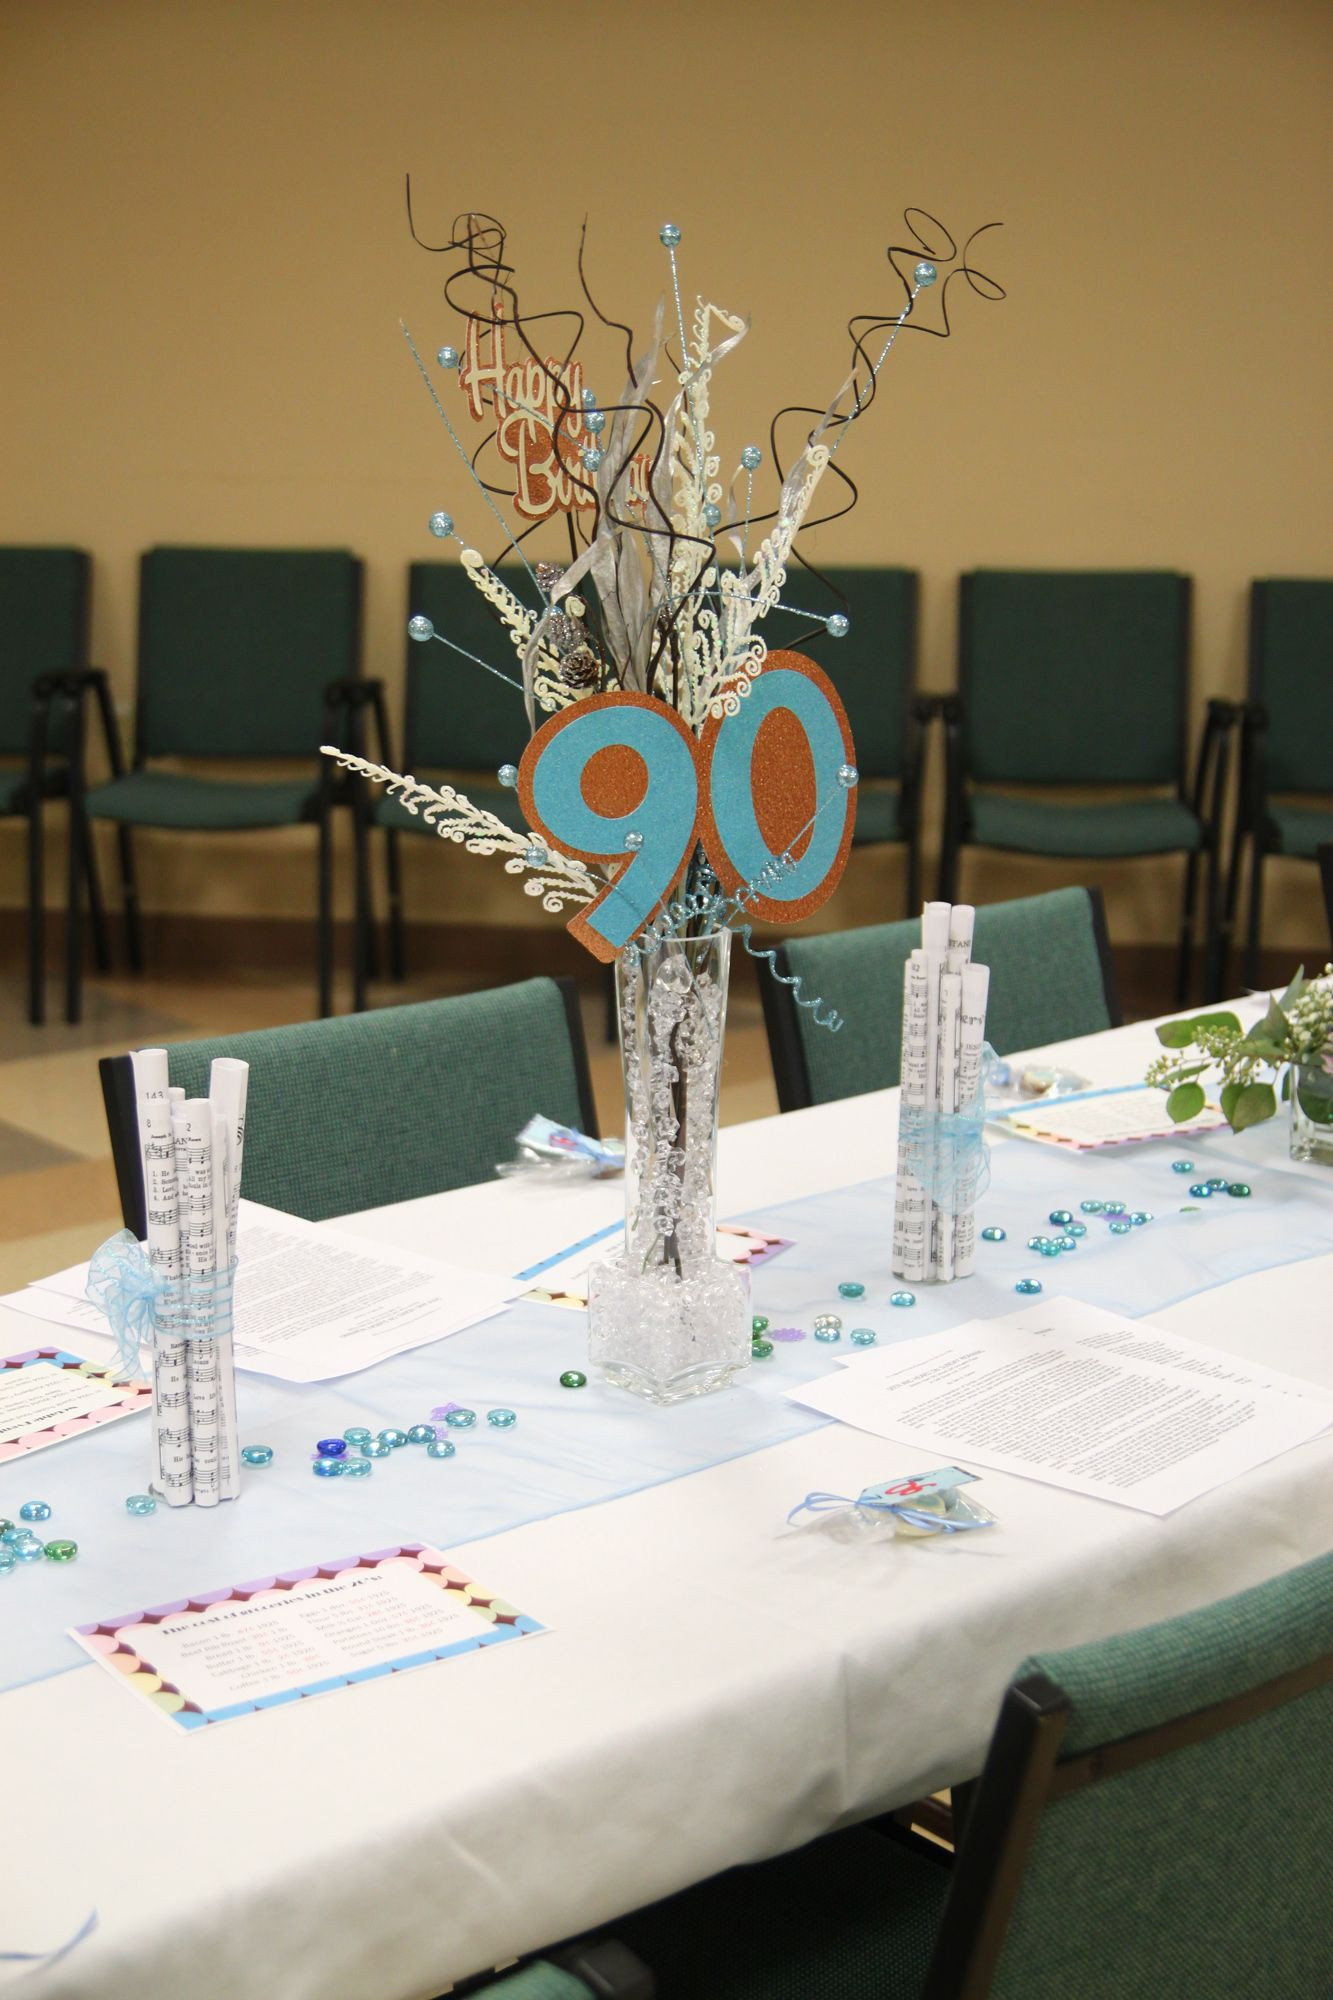 90th Birthday Party Decorations
 Centerpieces for Mom s 90th birthday